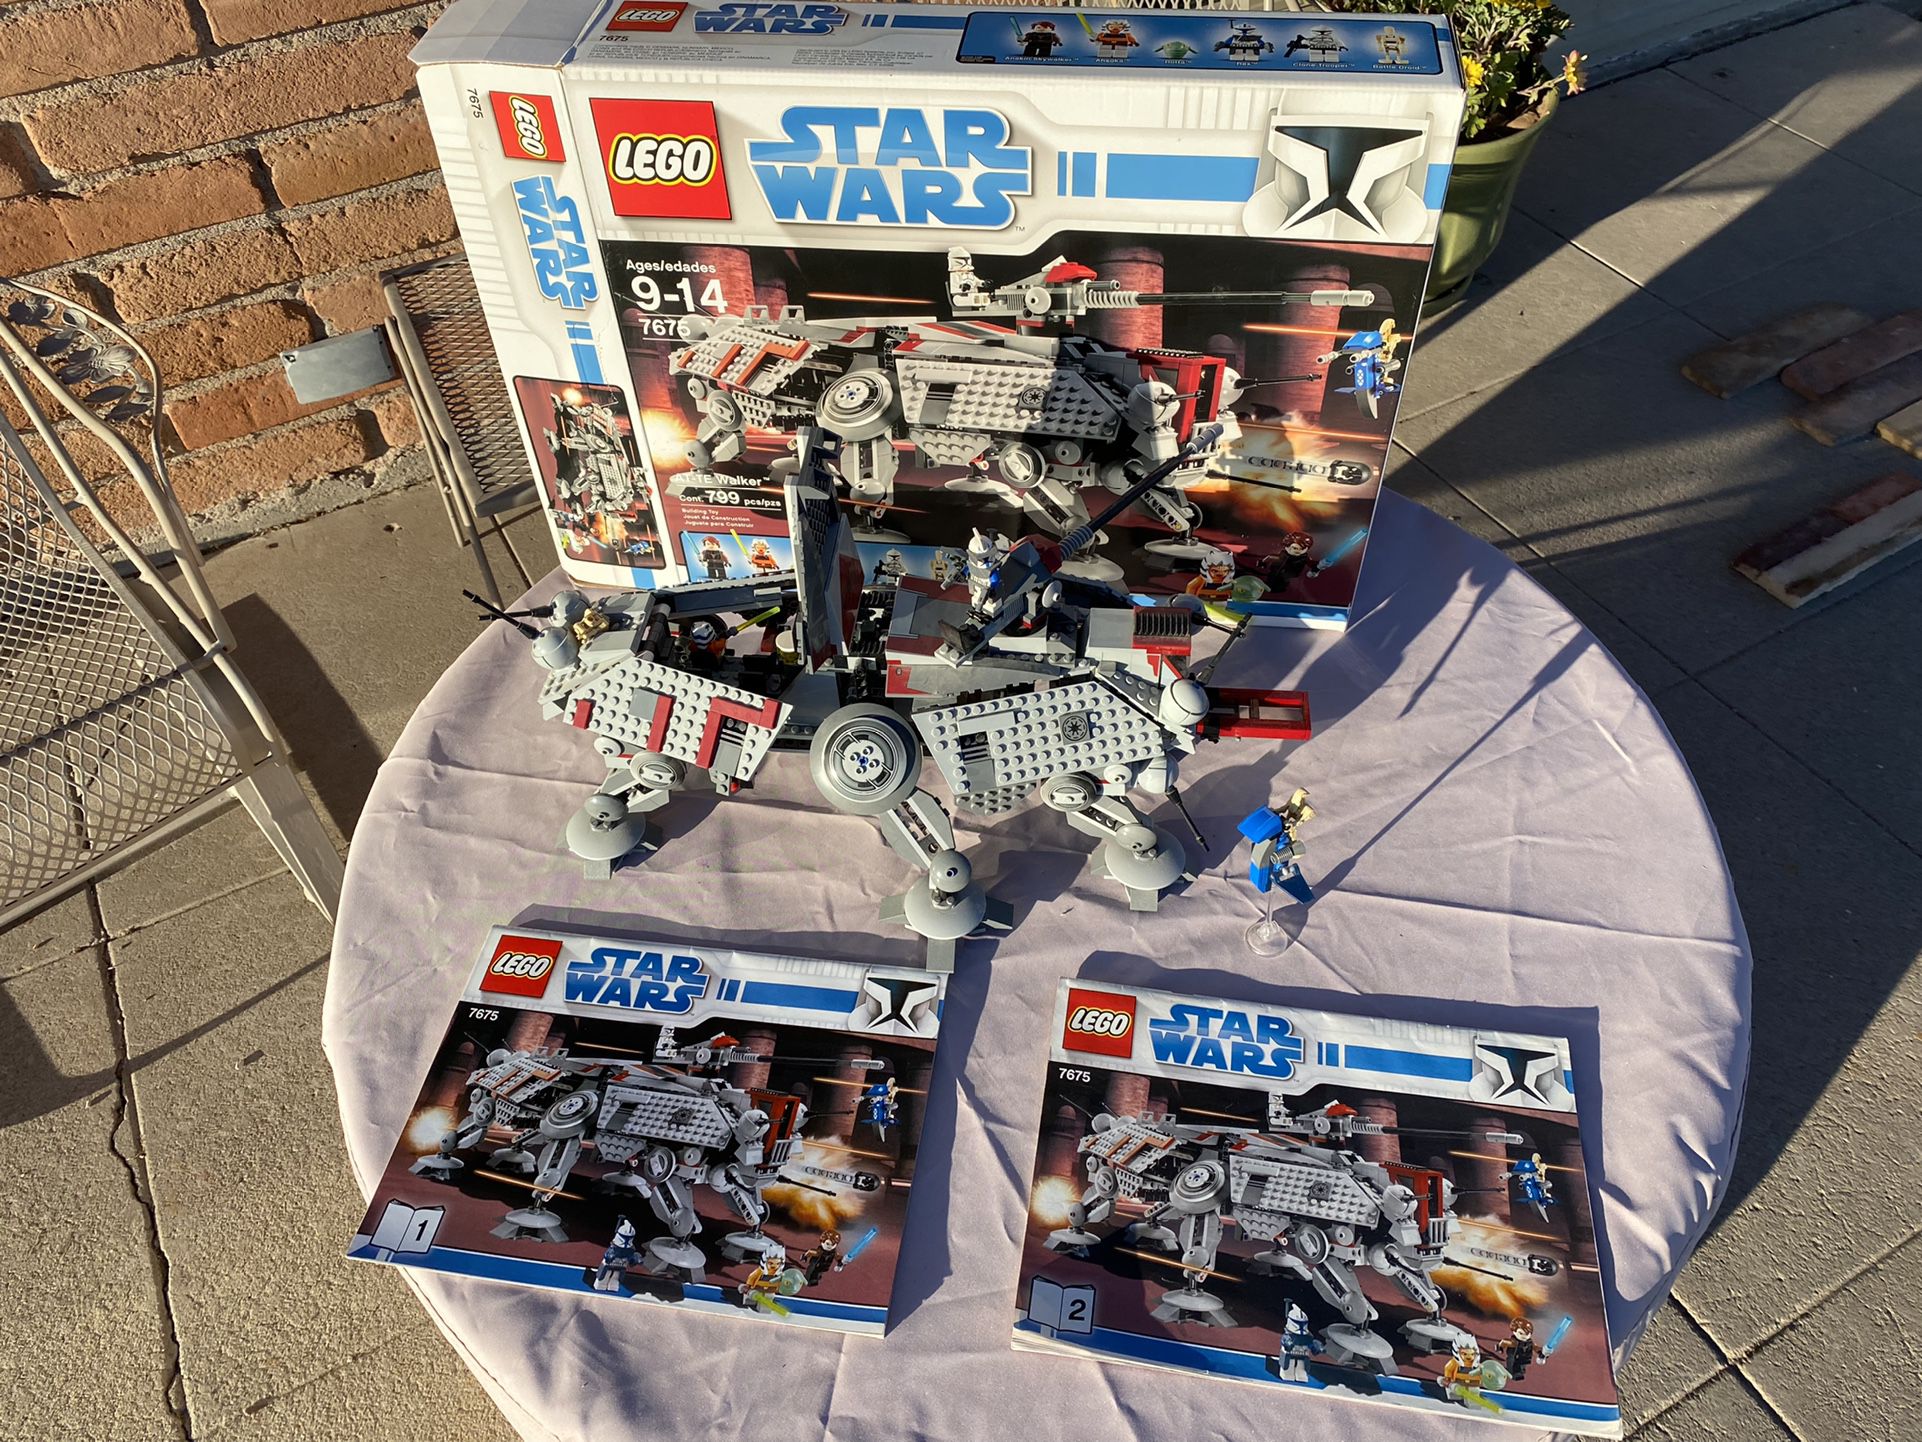 LEGO Star Wars Rare 7675 Walker With Box And Manuals, Rex, Ashoka, Rotta, Clone trooper, droid. Anakin Skywalker. for Sale in Fort Bliss, TX - OfferUp